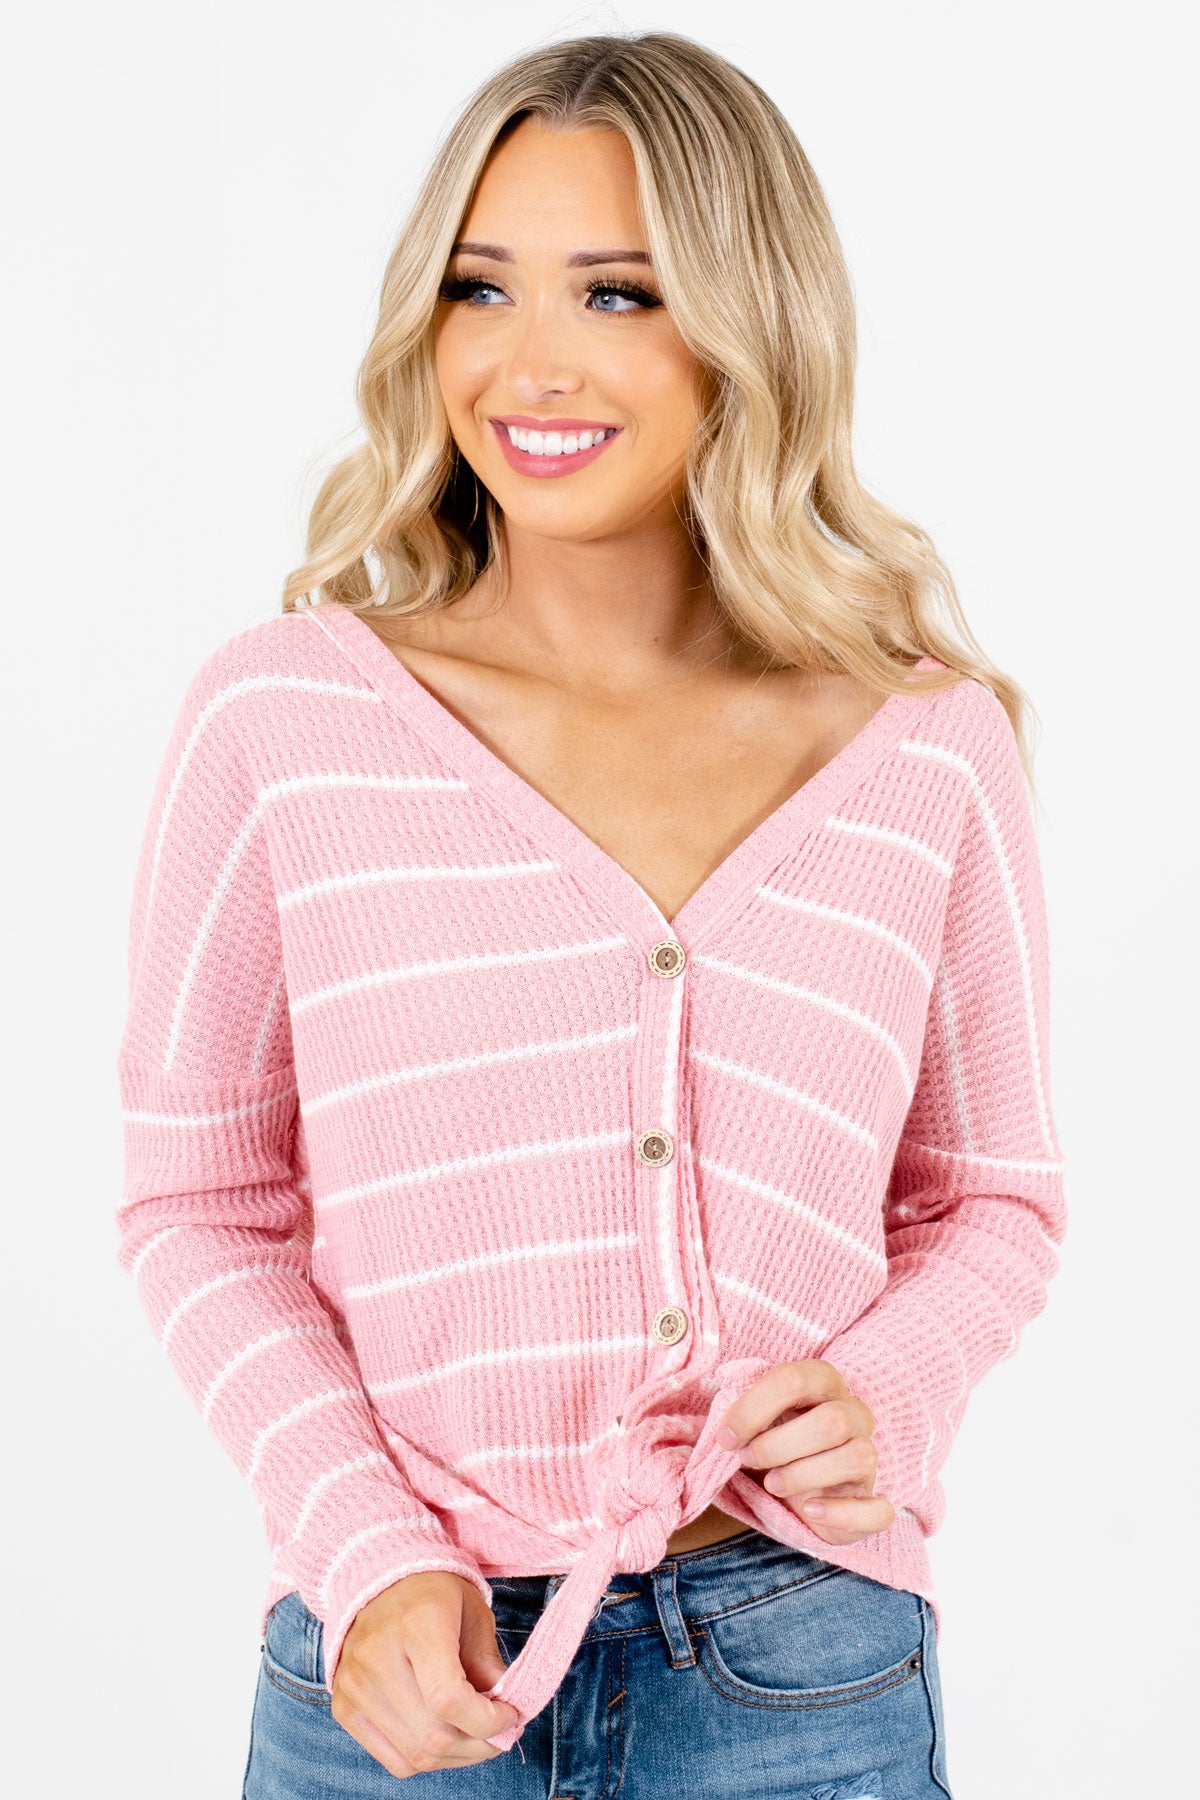 Pink and White Stripe Patterned Boutique Tops for Women